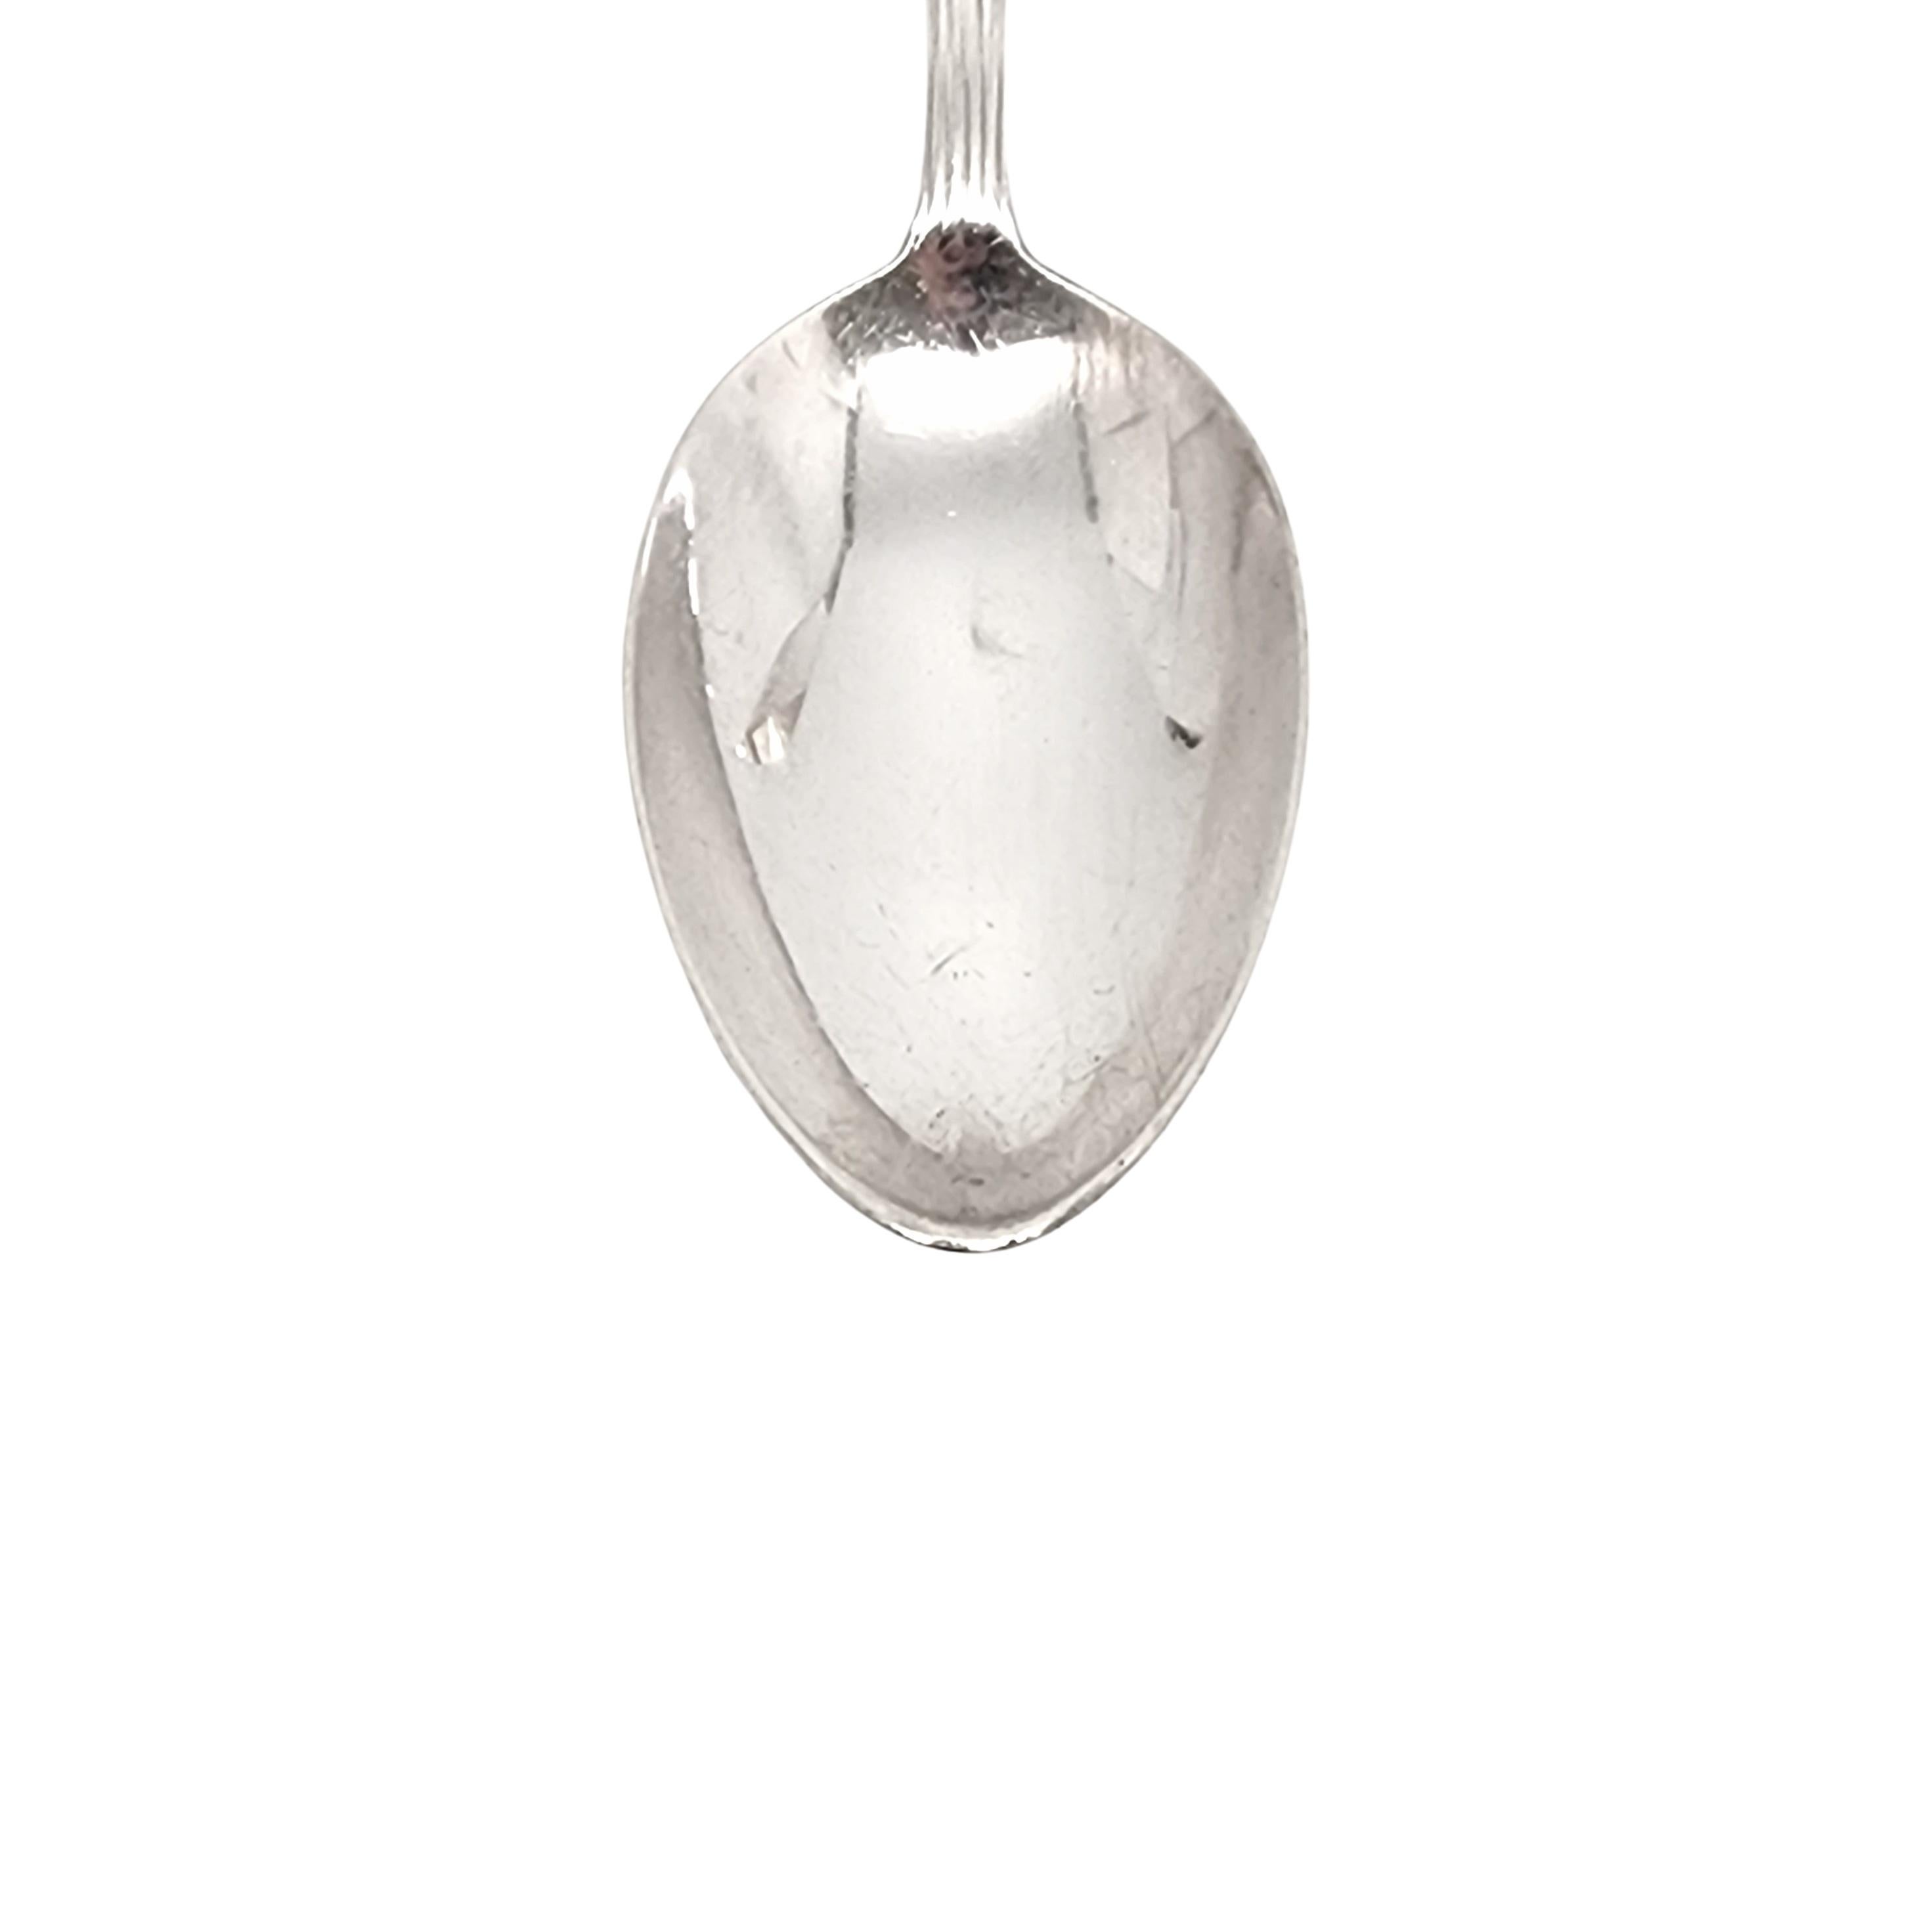 Gorham Versailles Sterling Silver Tablespoon Serving Spoon For Sale 3